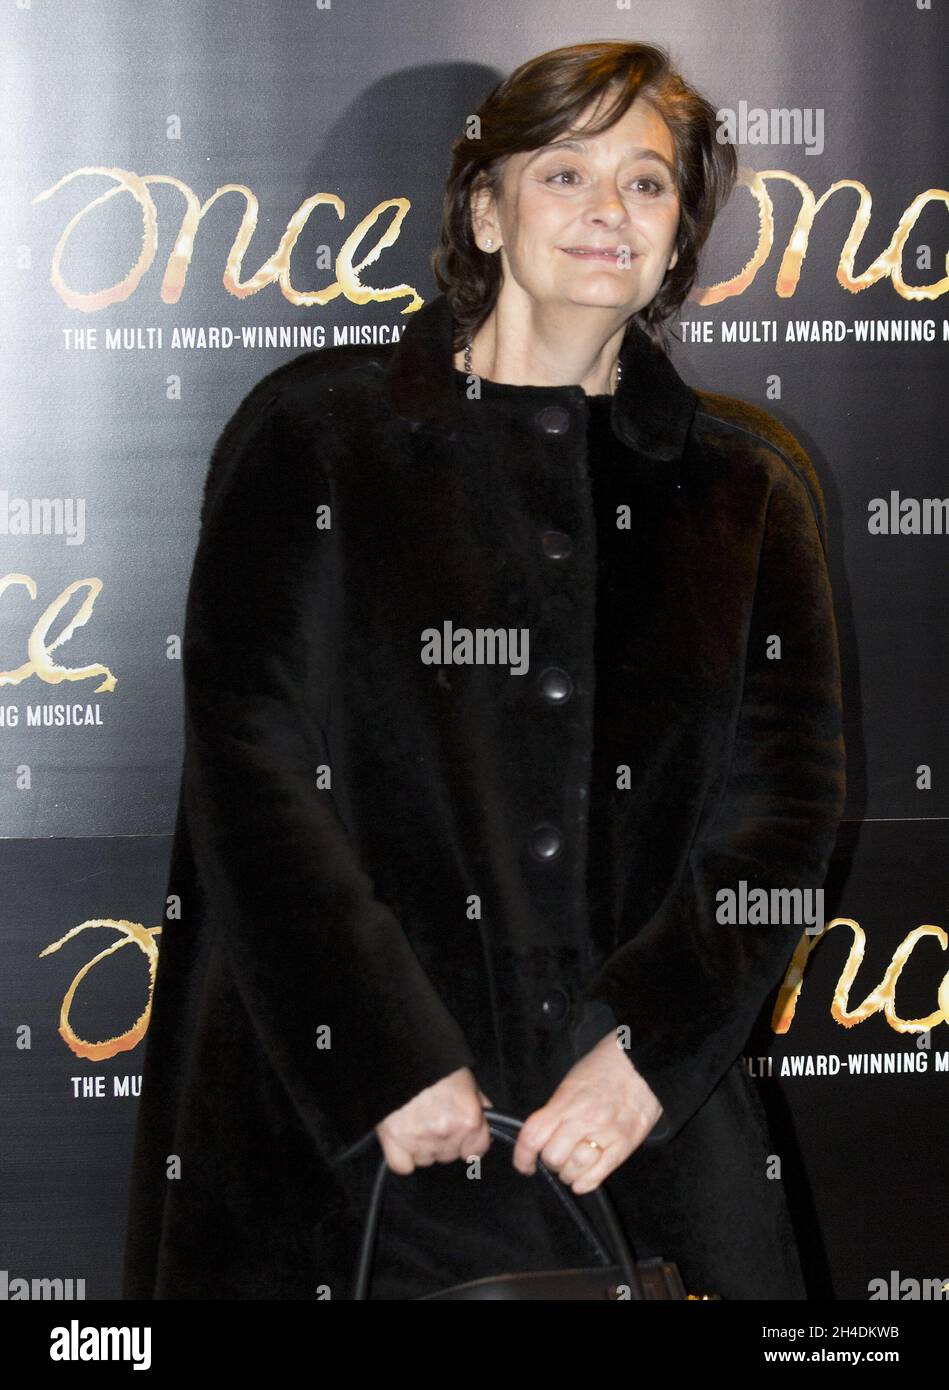 British barrister and former British Prime Minister Tony Blair's wife Cherie Blair, CBE, QC attends the opening night of Ronan Keating joining the cast of Once the musical Stock Photo